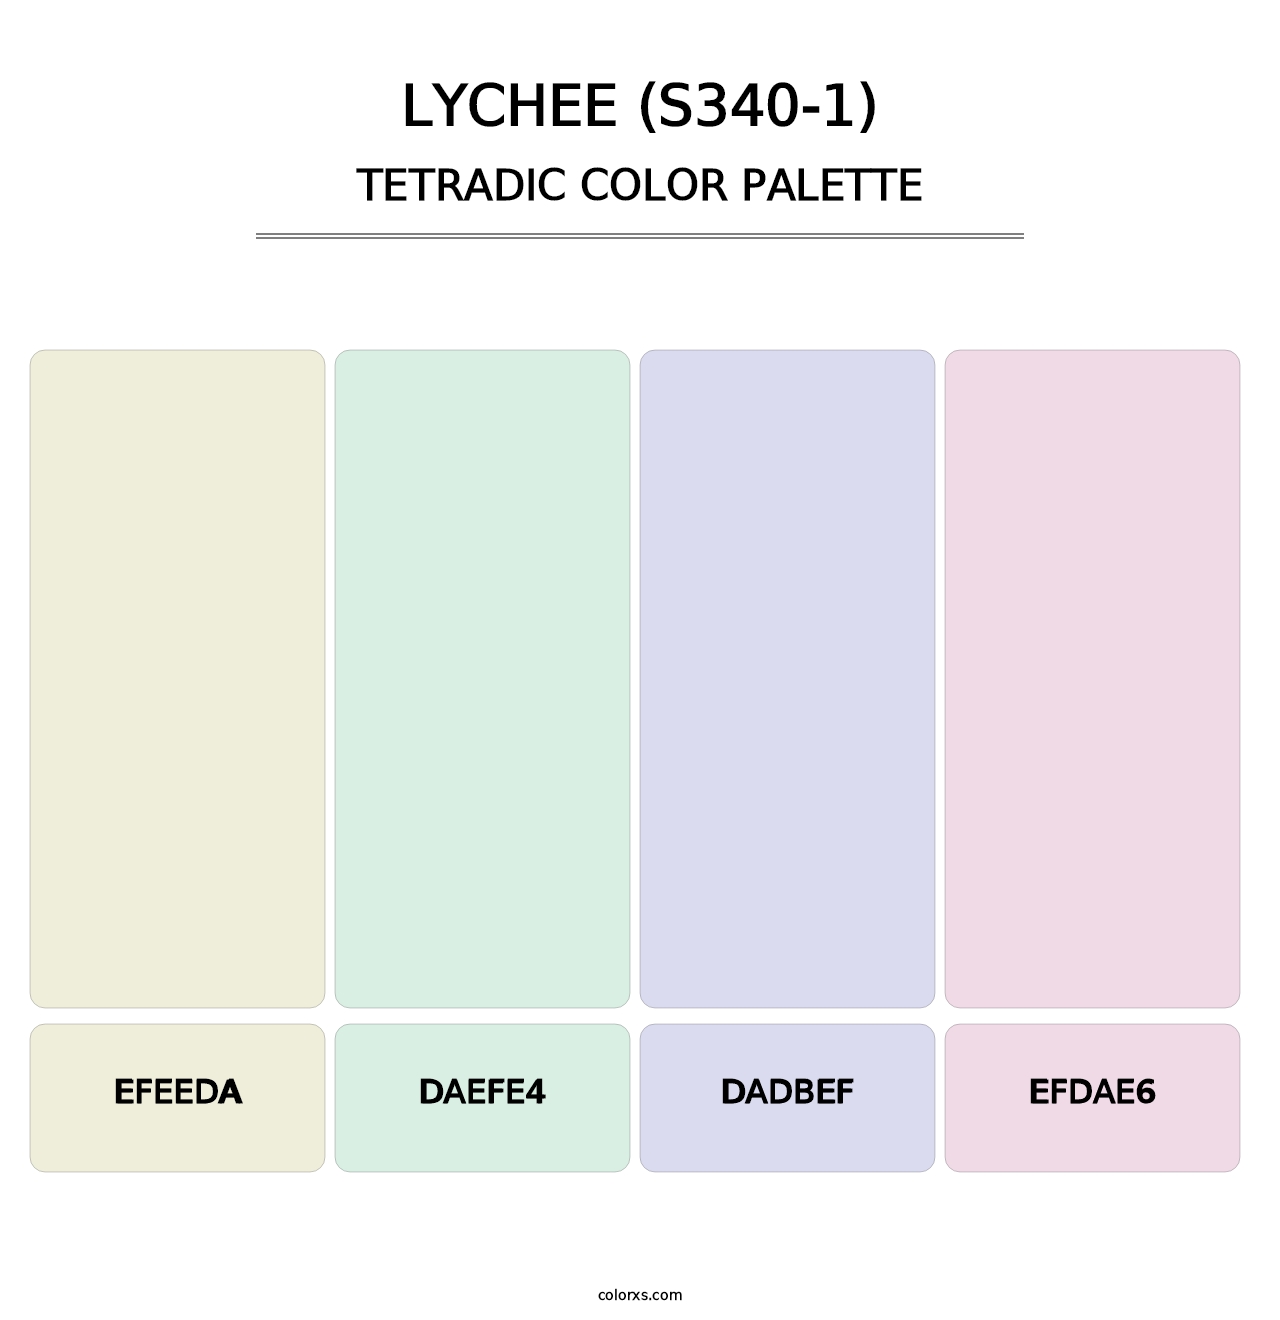 Lychee (S340-1) - Tetradic Color Palette